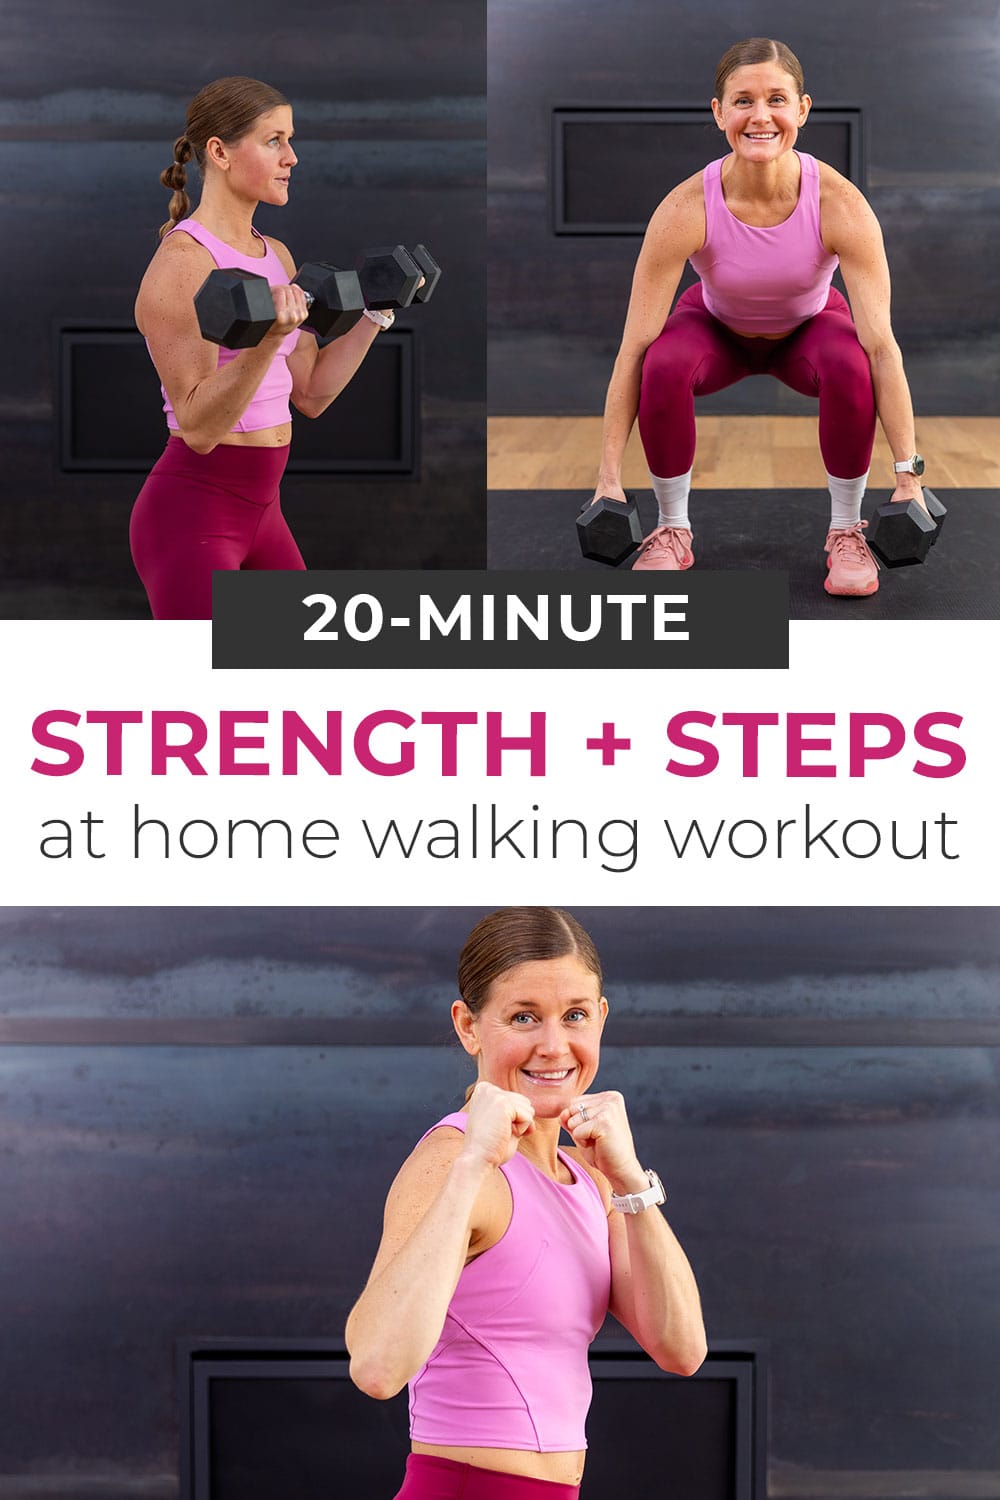 20-Minute Strength + Walking Workout (Video)| Nourish Move Love